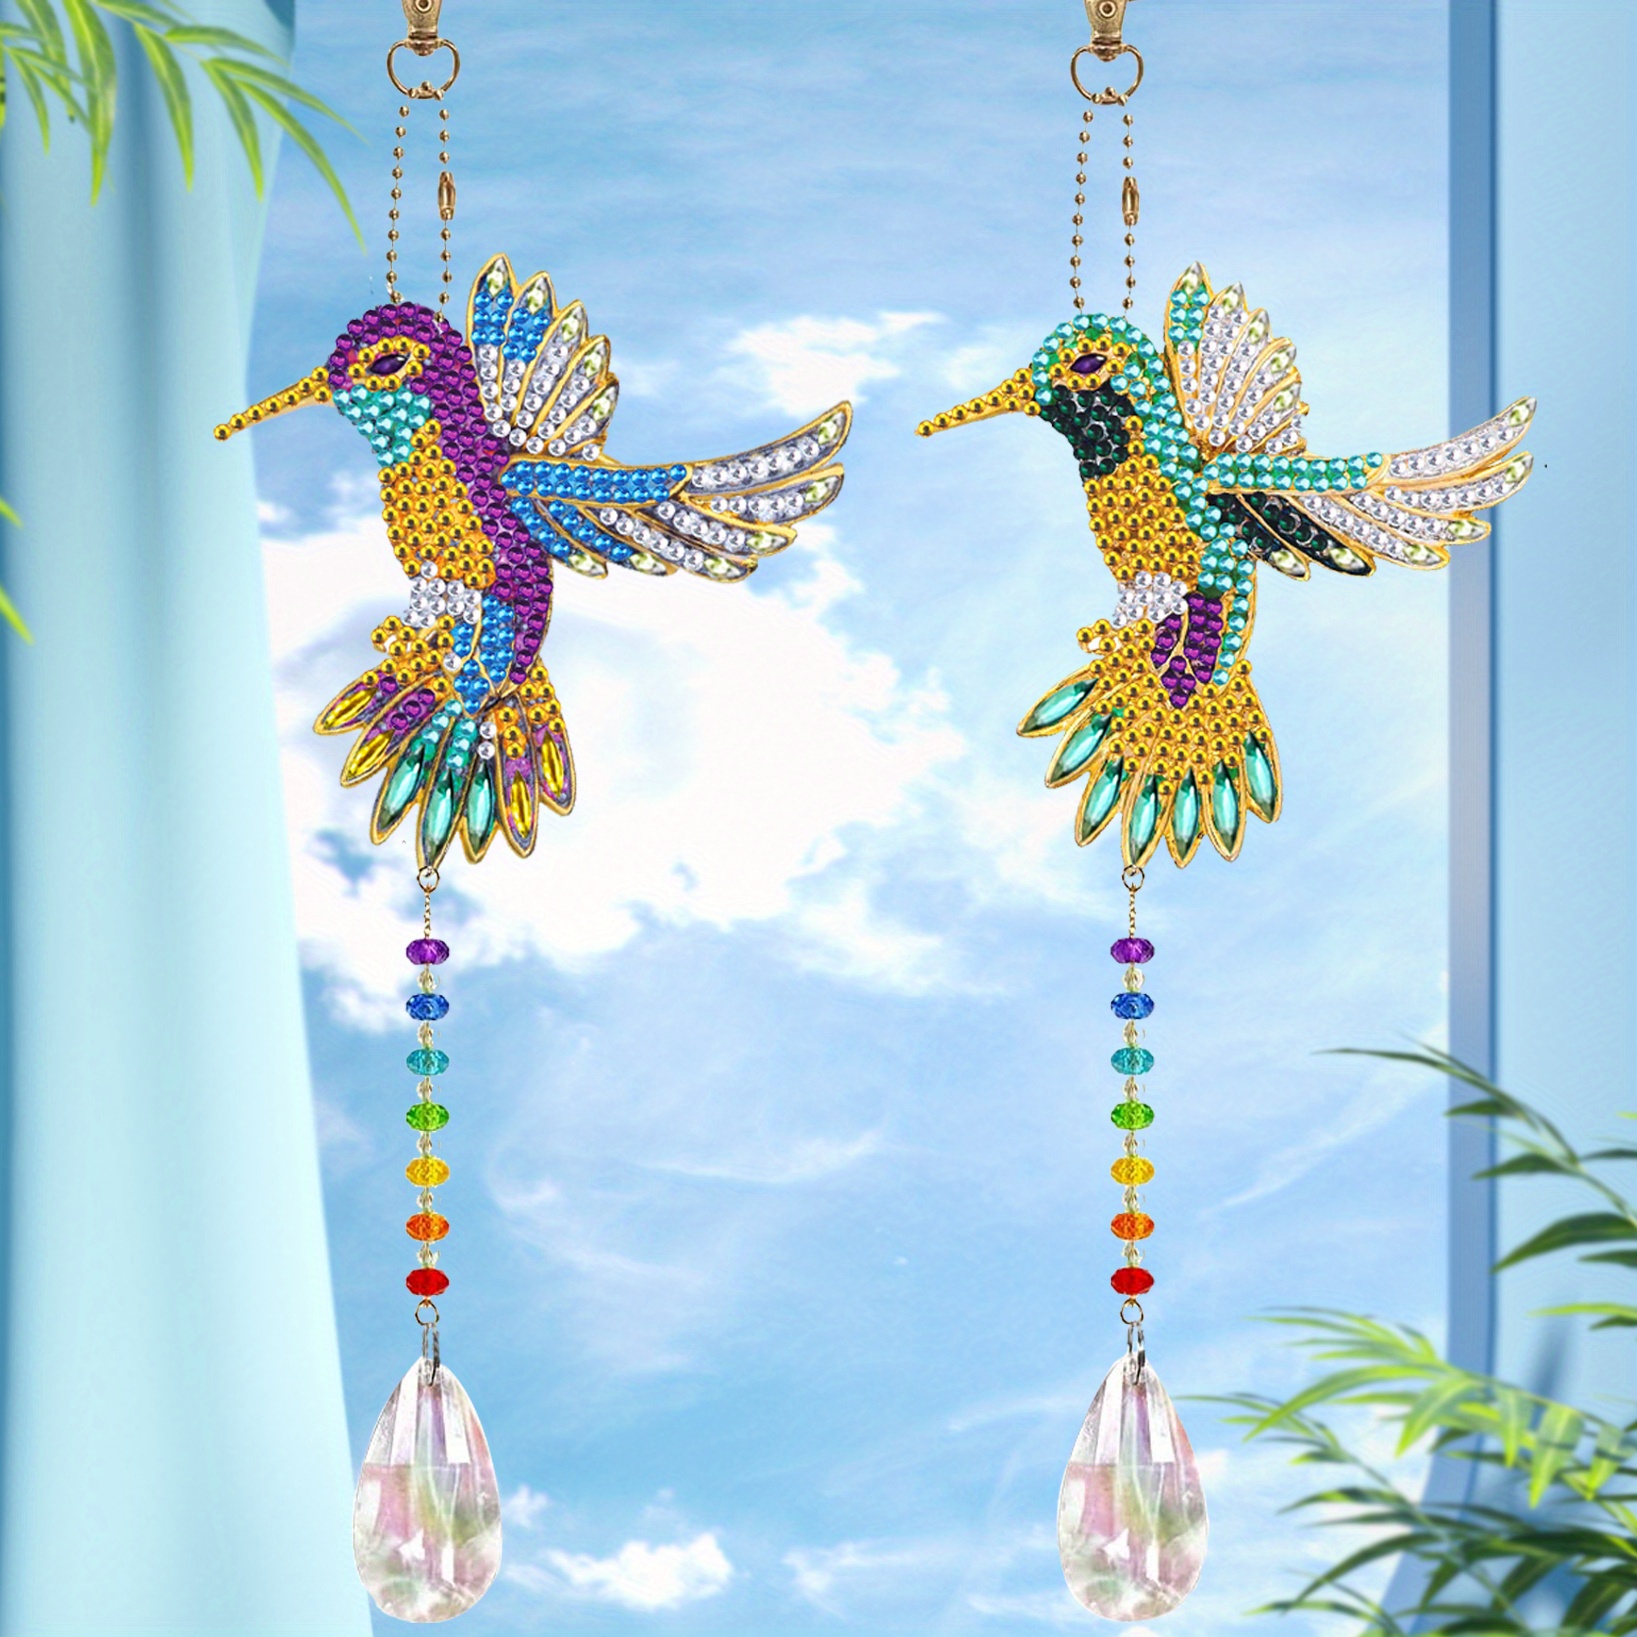 5 Pieces Diamond Painting Suncatcher Kits for Adults, Wind Chime Kits for  Kids D